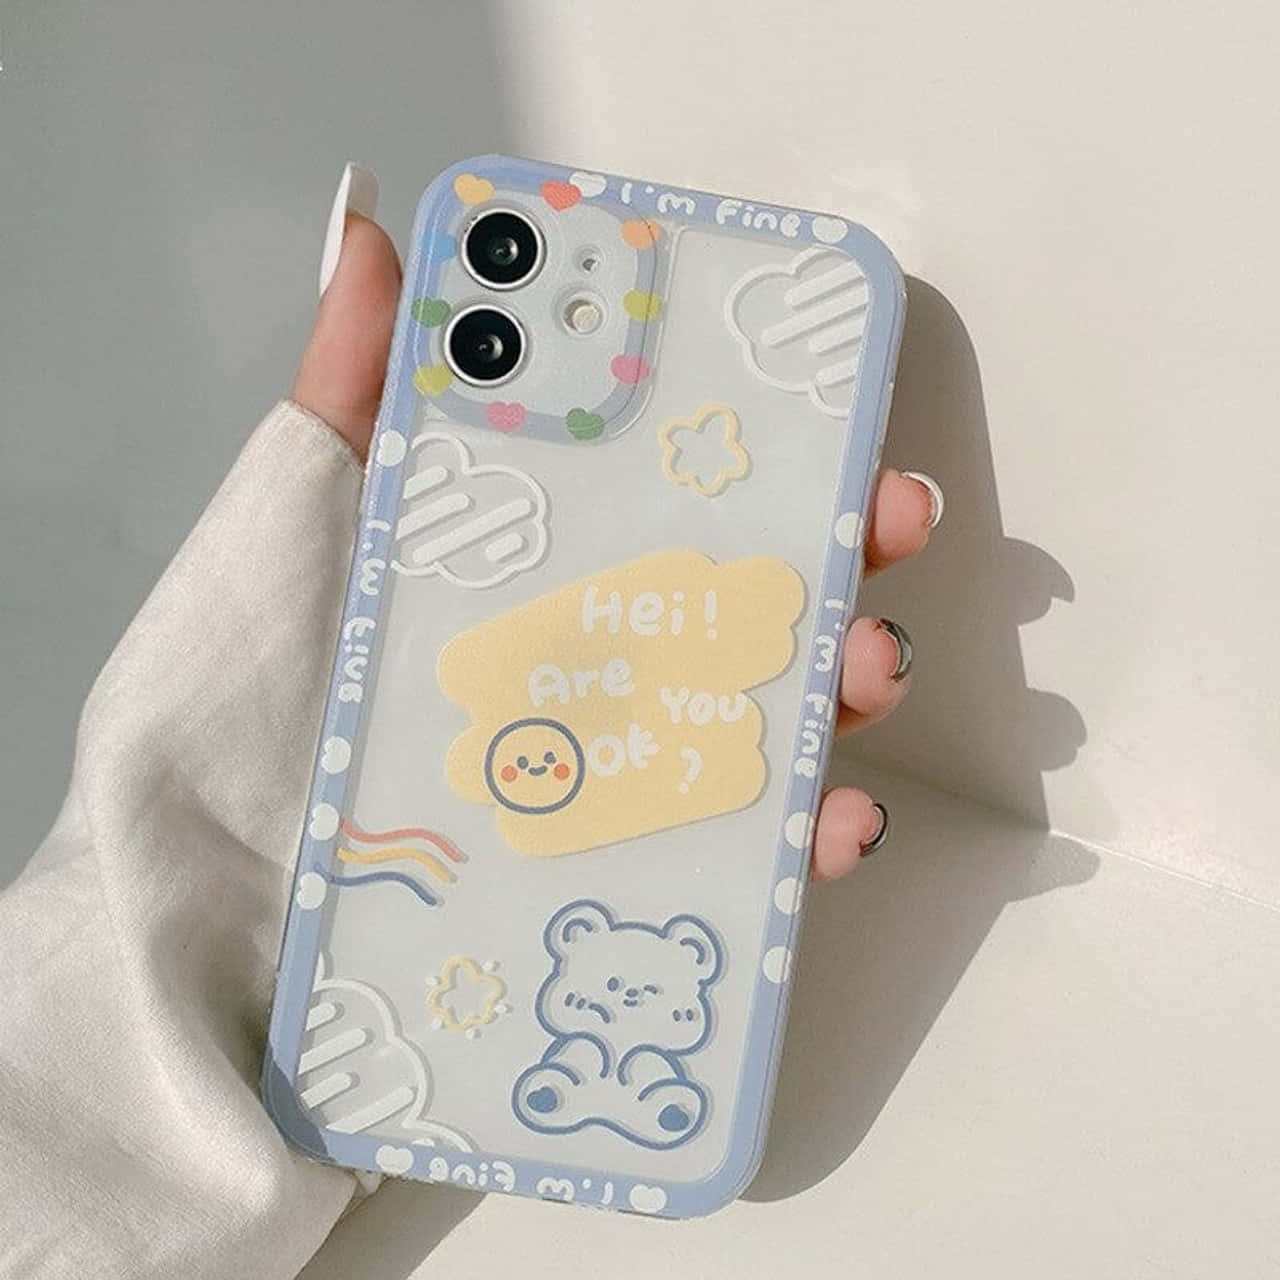 Mobile Cover -Pen Drawing Heart Printed Mobile Back Case - anidiots